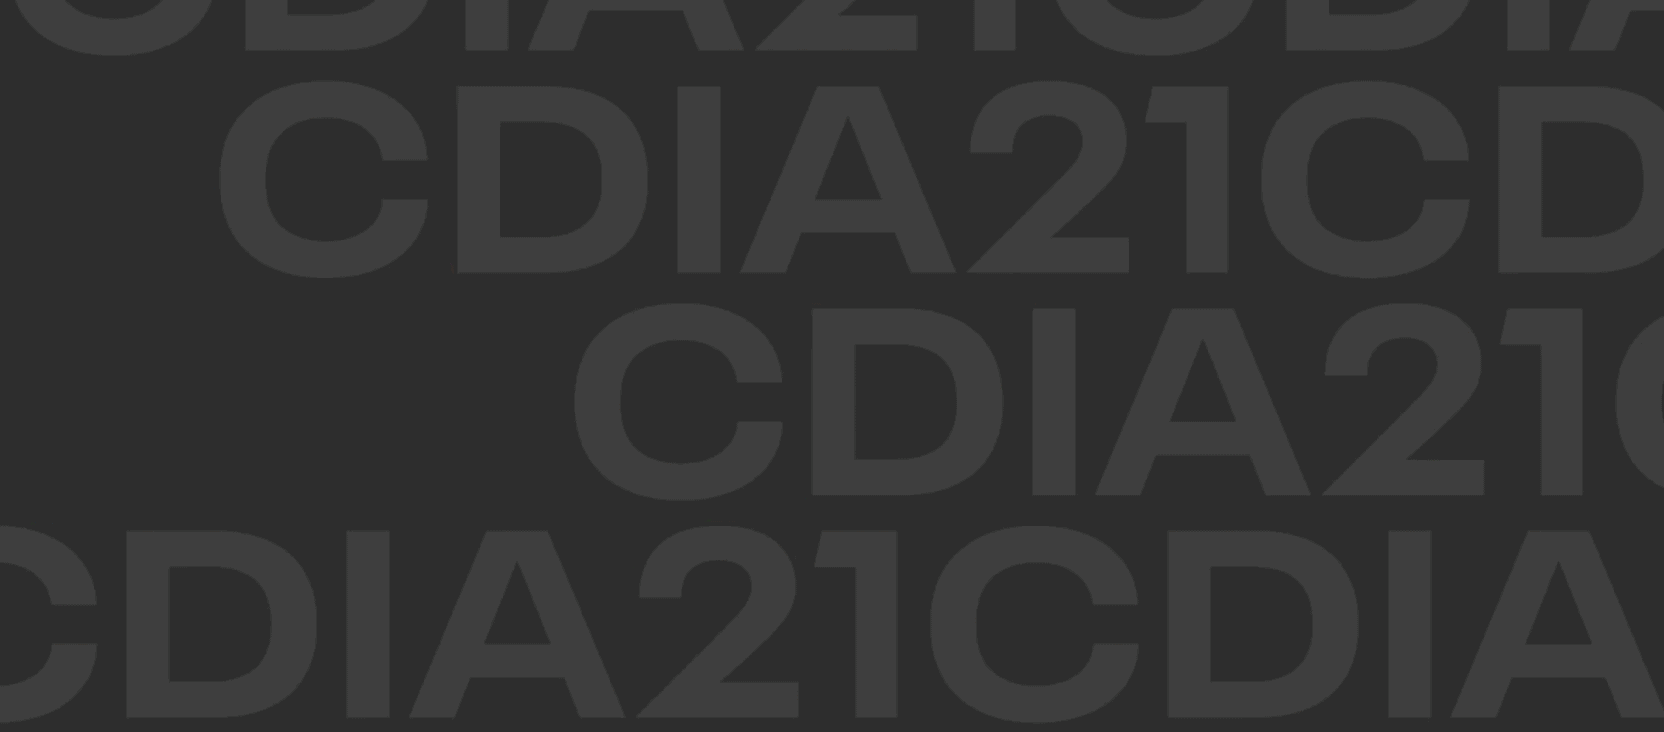 Announcing the 2021 Data Impact Awards